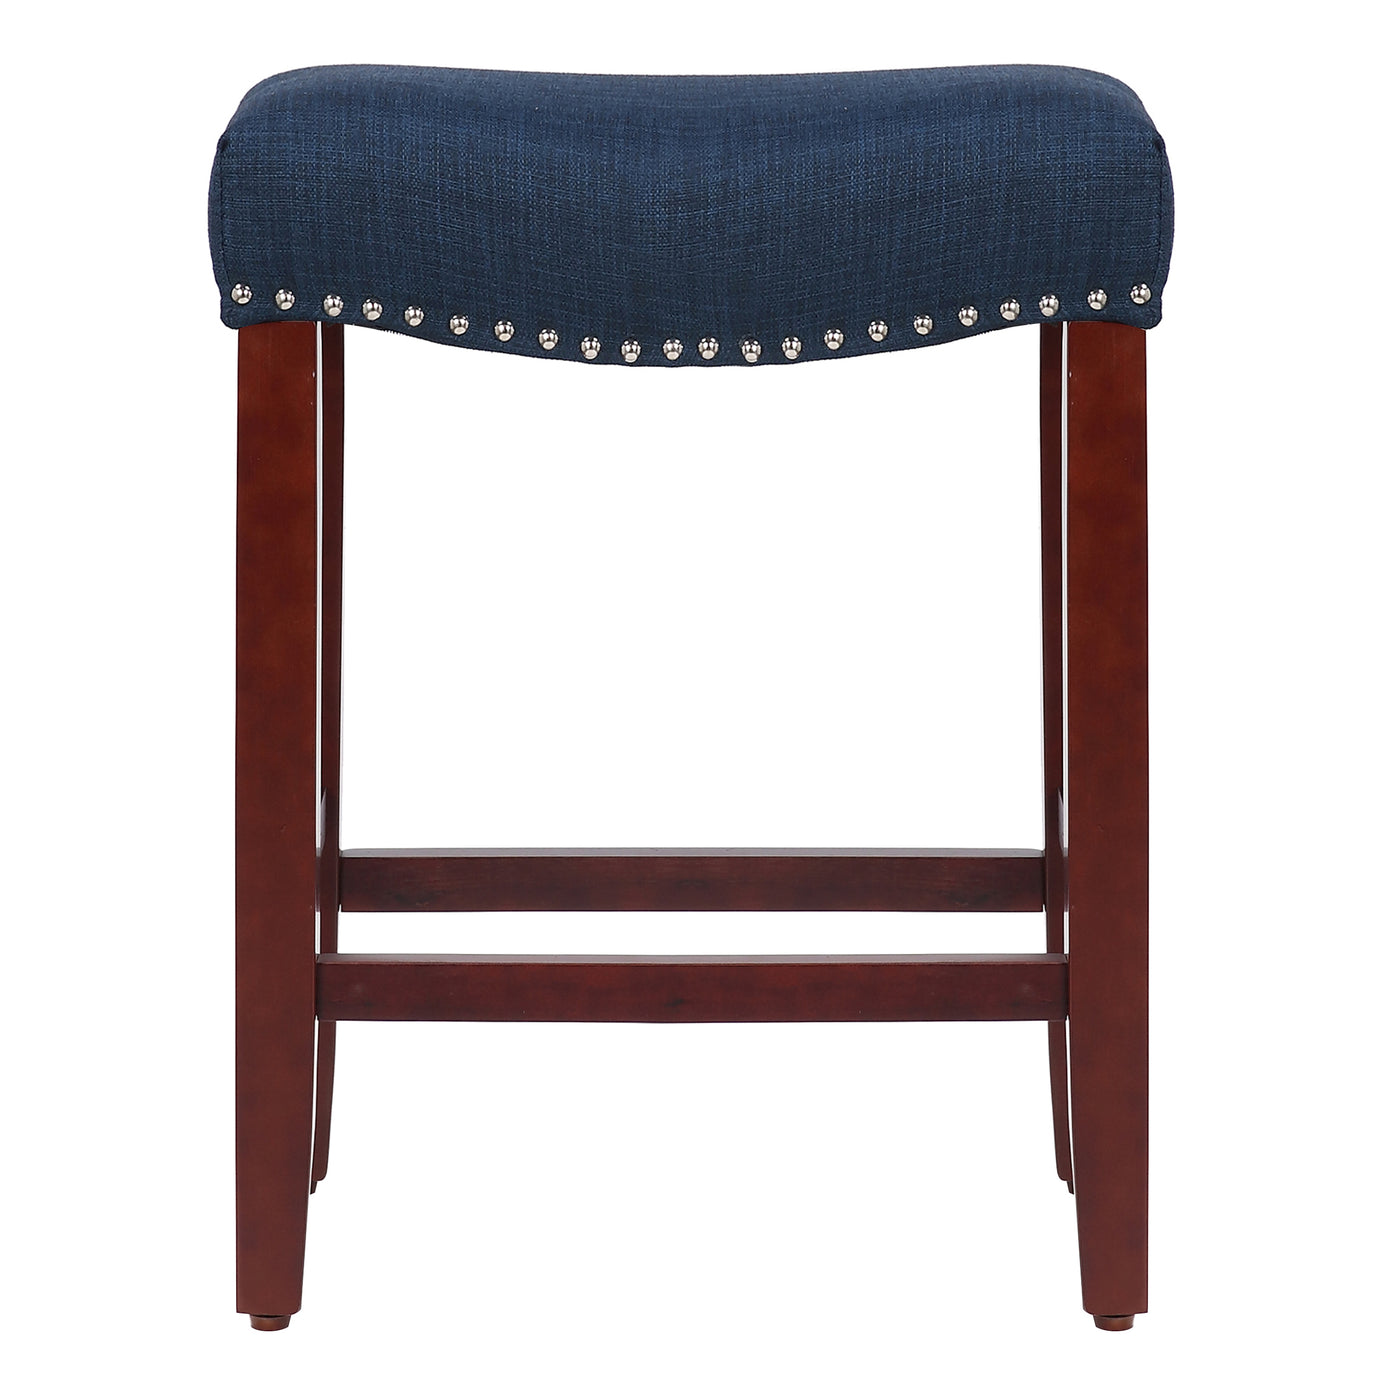 Lenox 24" Upholstered Saddle Seat Counter Stool, Cherry Red